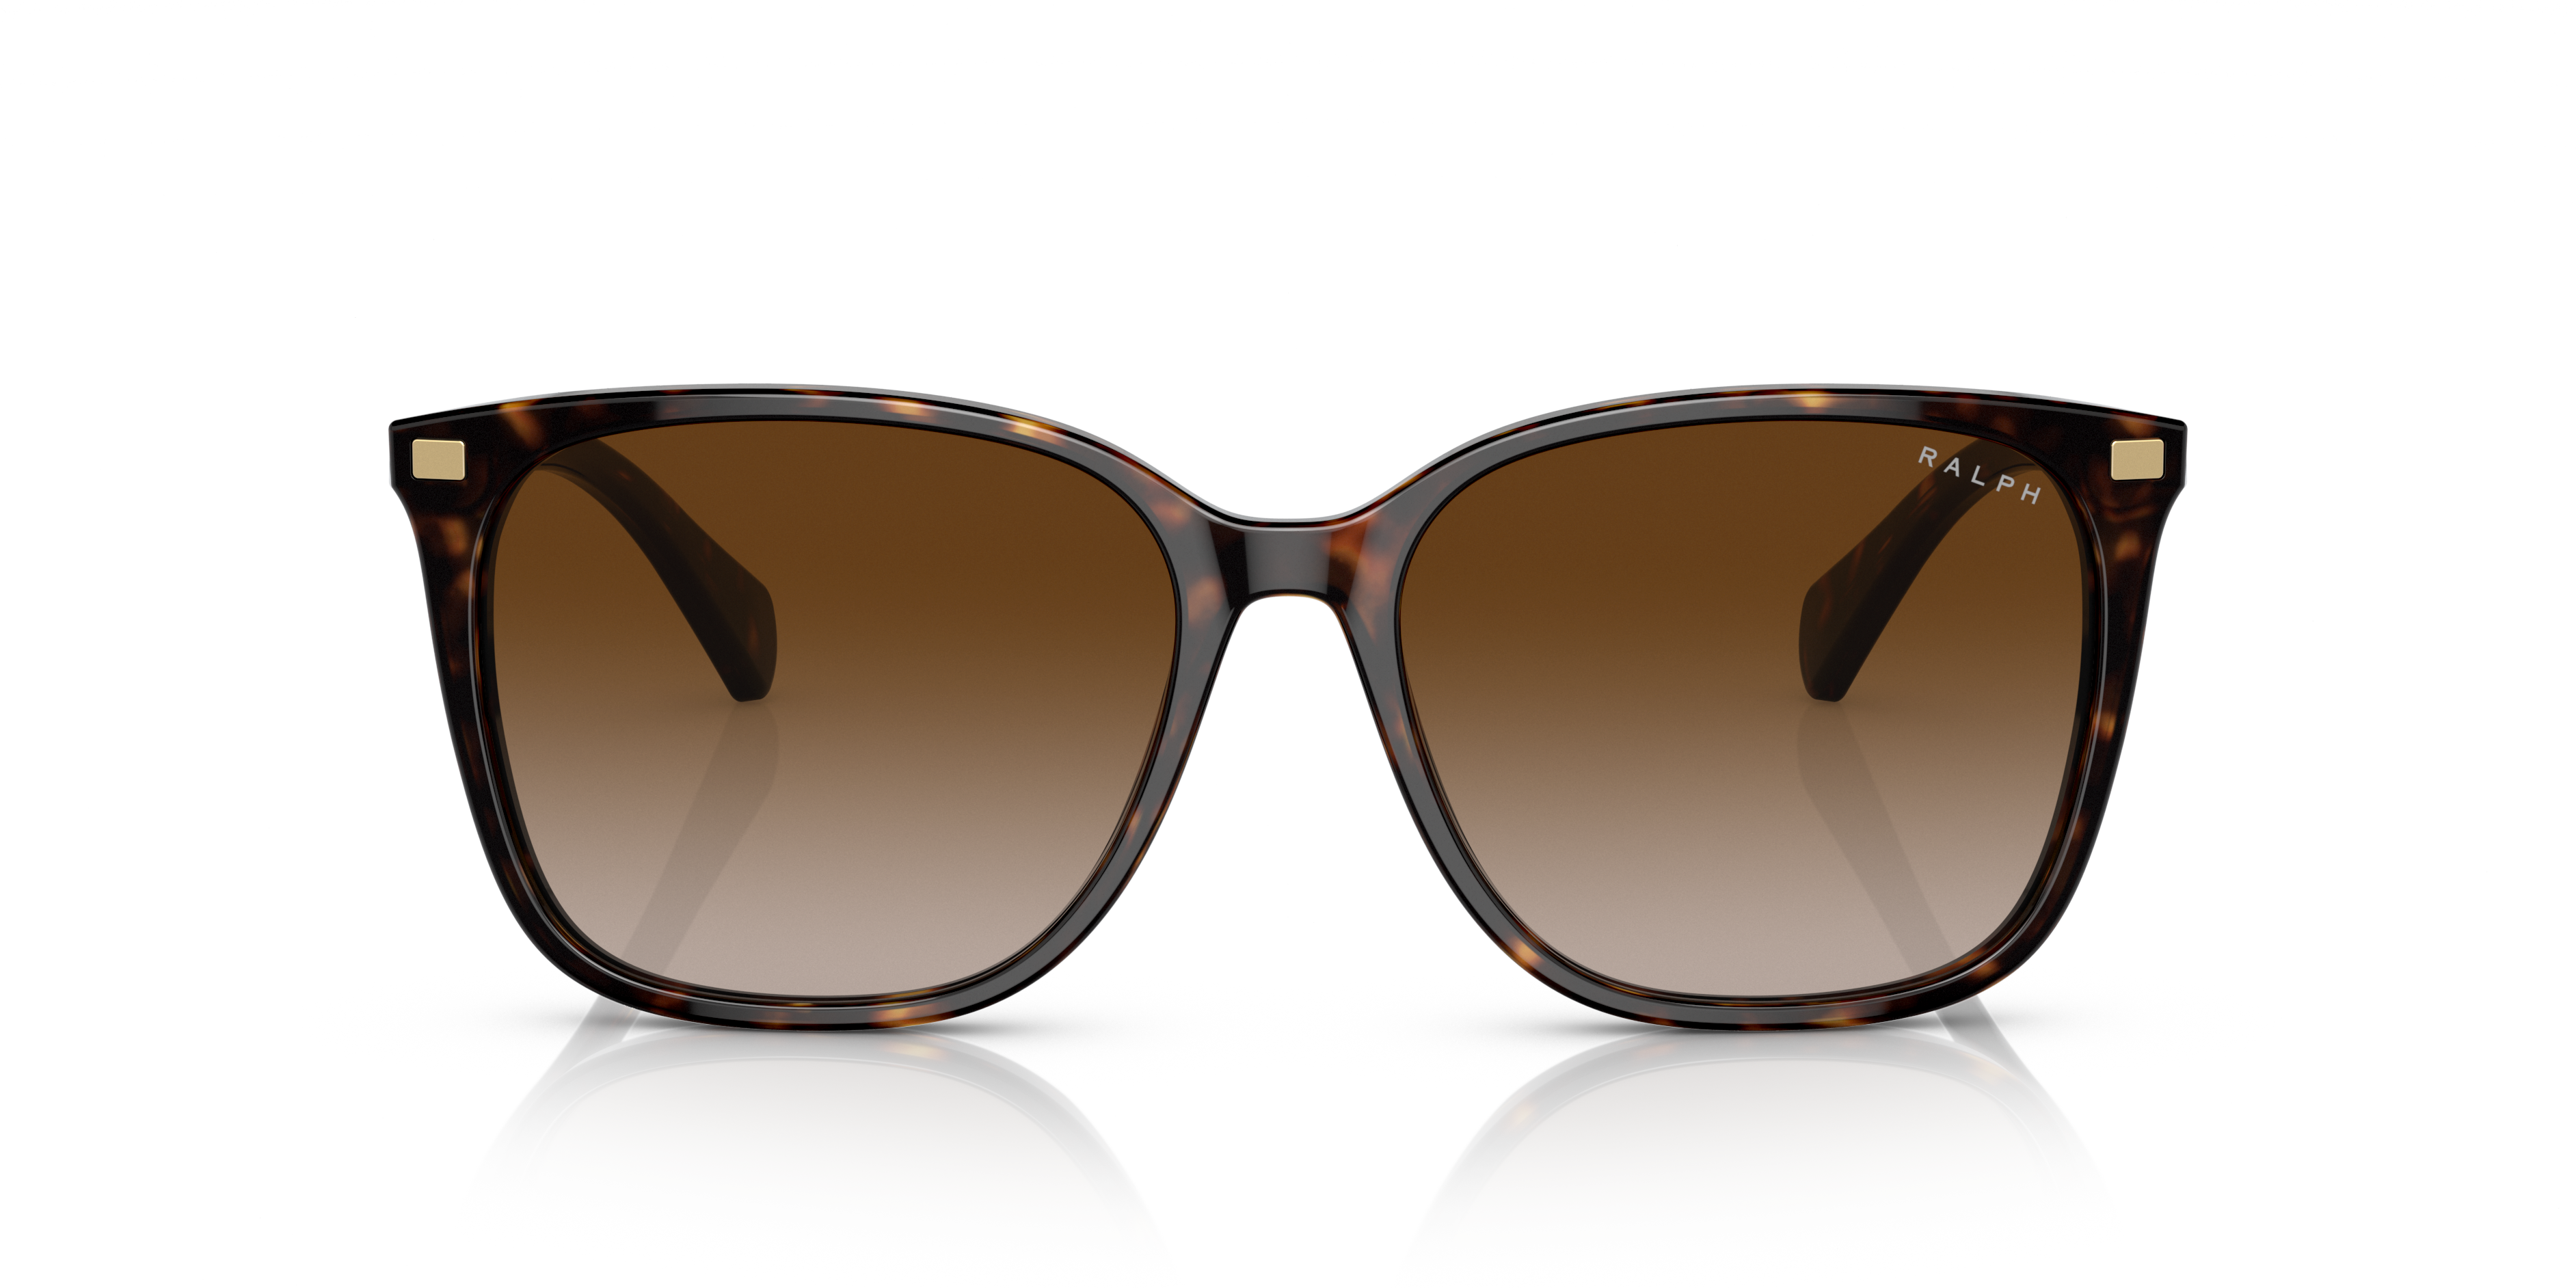 [products.image.front] Ralph by Ralph Lauren RA 5293 Sunglasses